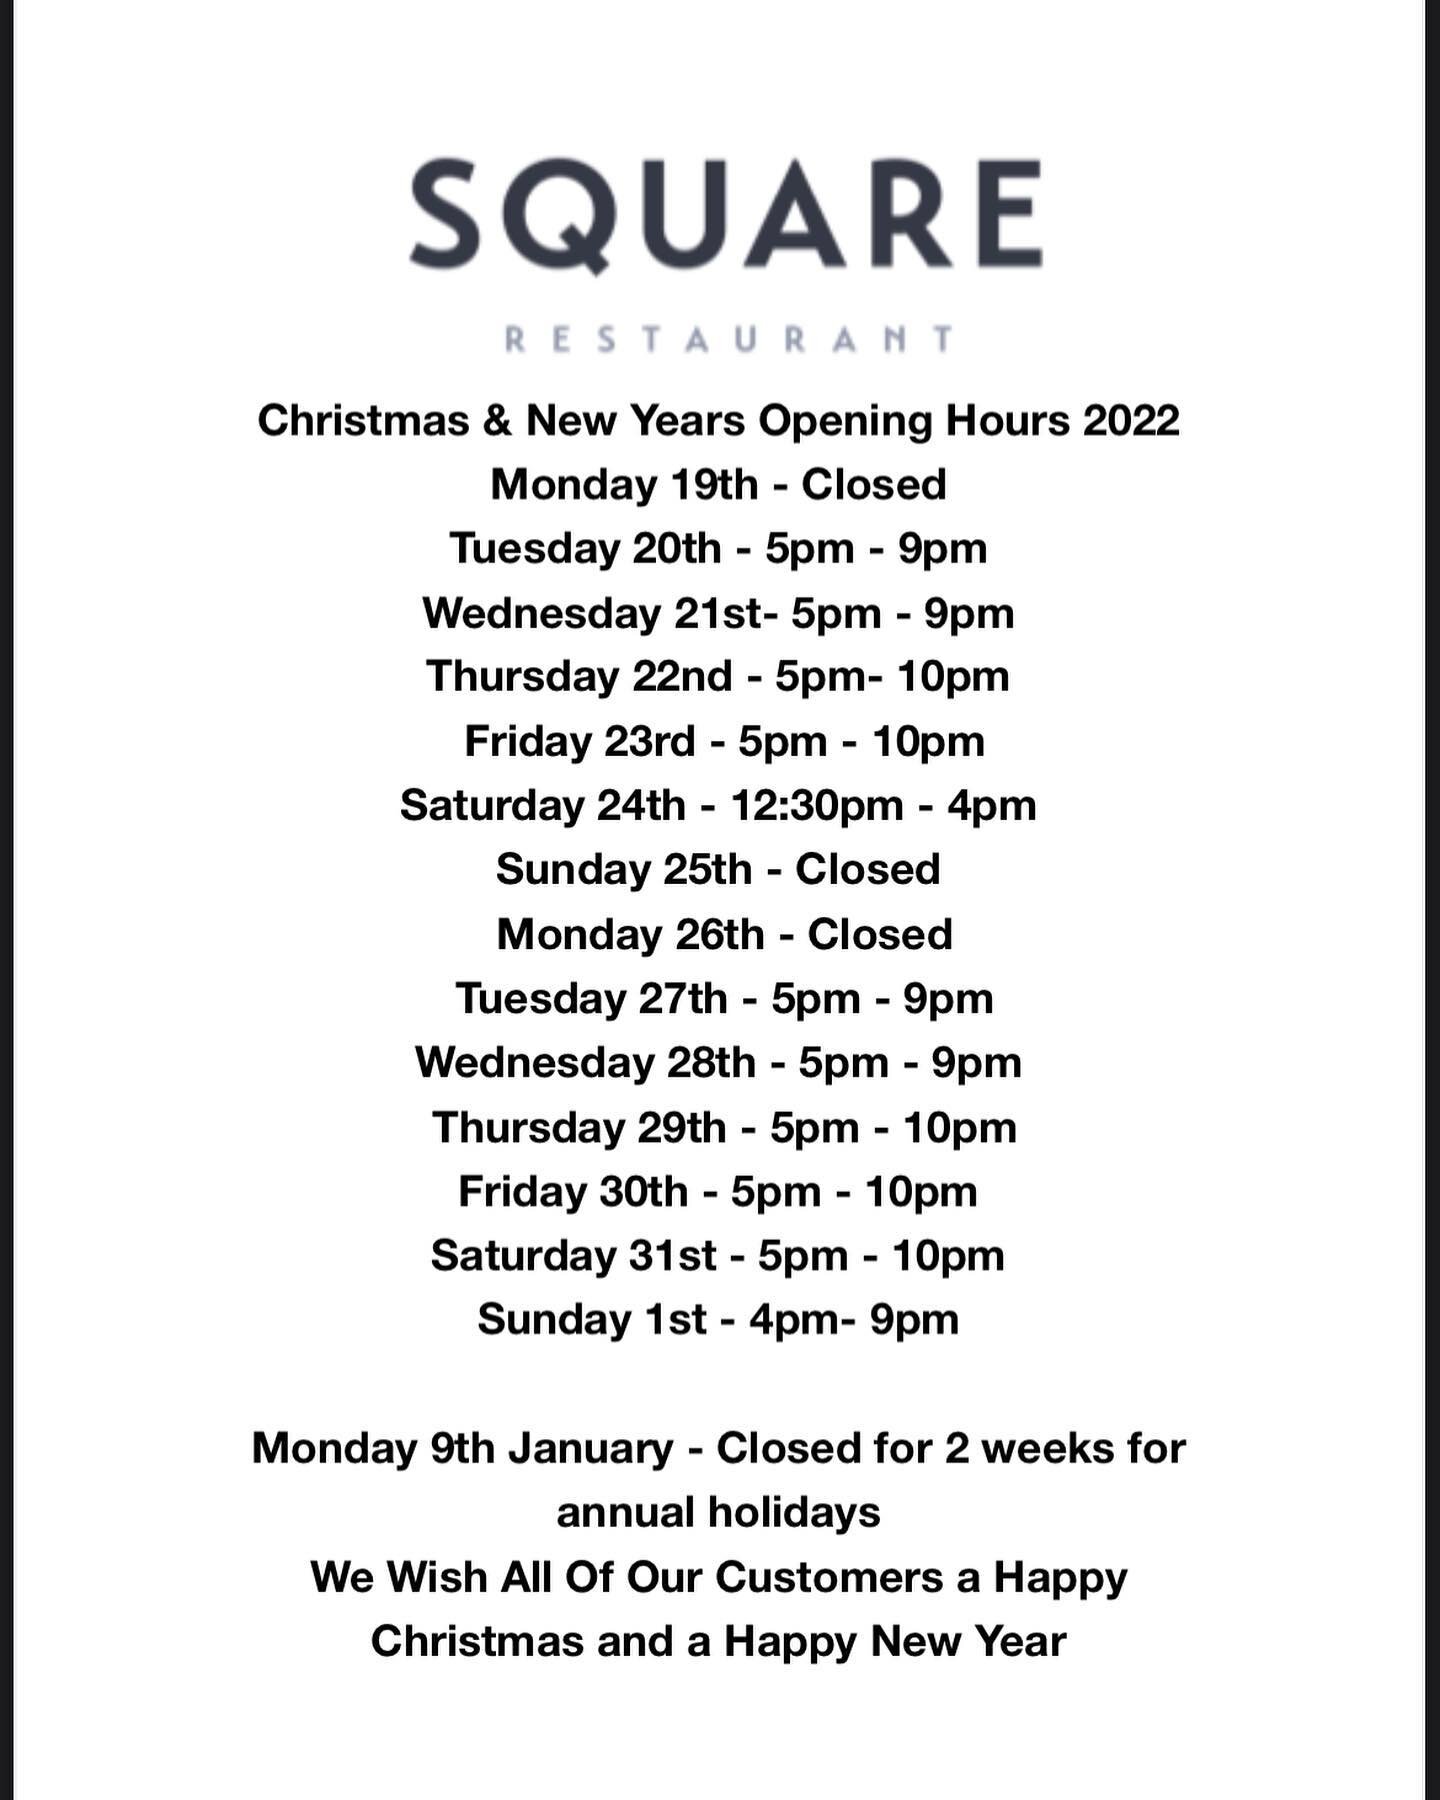 ✨CHRISTMAS HOURS ✨

Christmas season is nearly upon us and we are starting to book up fast. We are taking deposits via Stripe for all bookings in December. 
When booking it requires card details and this can only be made through our website ( not goo